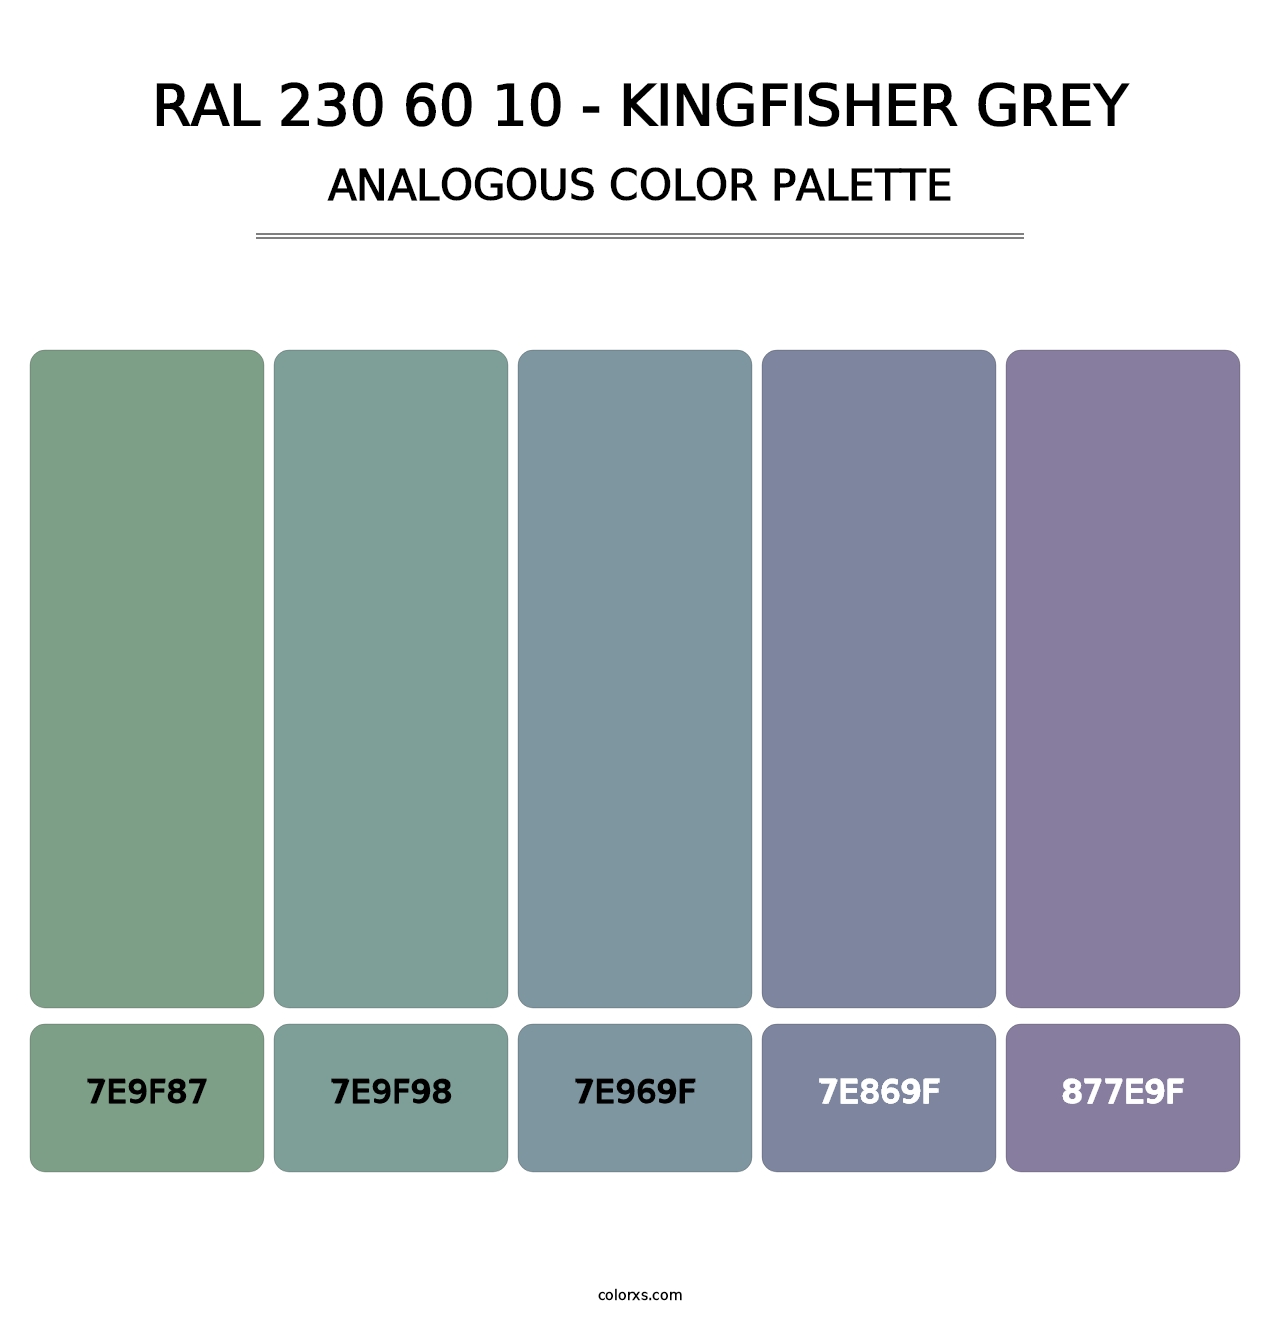 RAL 230 60 10 - Kingfisher Grey - Analogous Color Palette